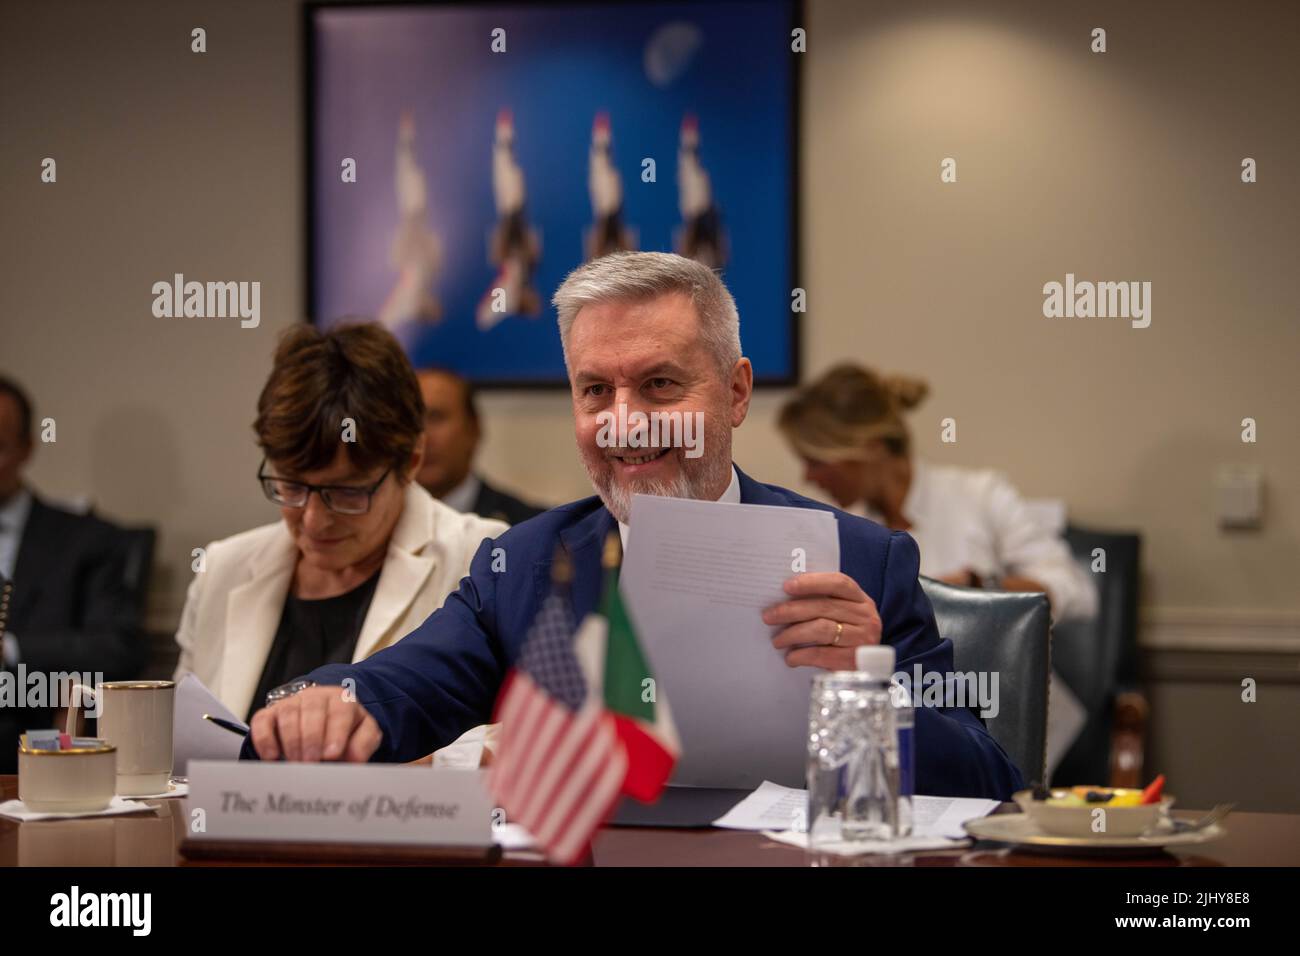 Arlington, United States of America. 14 July, 2022. Italian Minister of Defense Lorenzo Guerini during a face-to-face bilateral meeting hosted by U.S. Secretary of Defense Lloyd J. Austin III, at the Pentagon, July 14, 2022 in Arlington, Virginia.  Credit: MC2 James K Lee/DOD/Alamy Live News Stock Photo